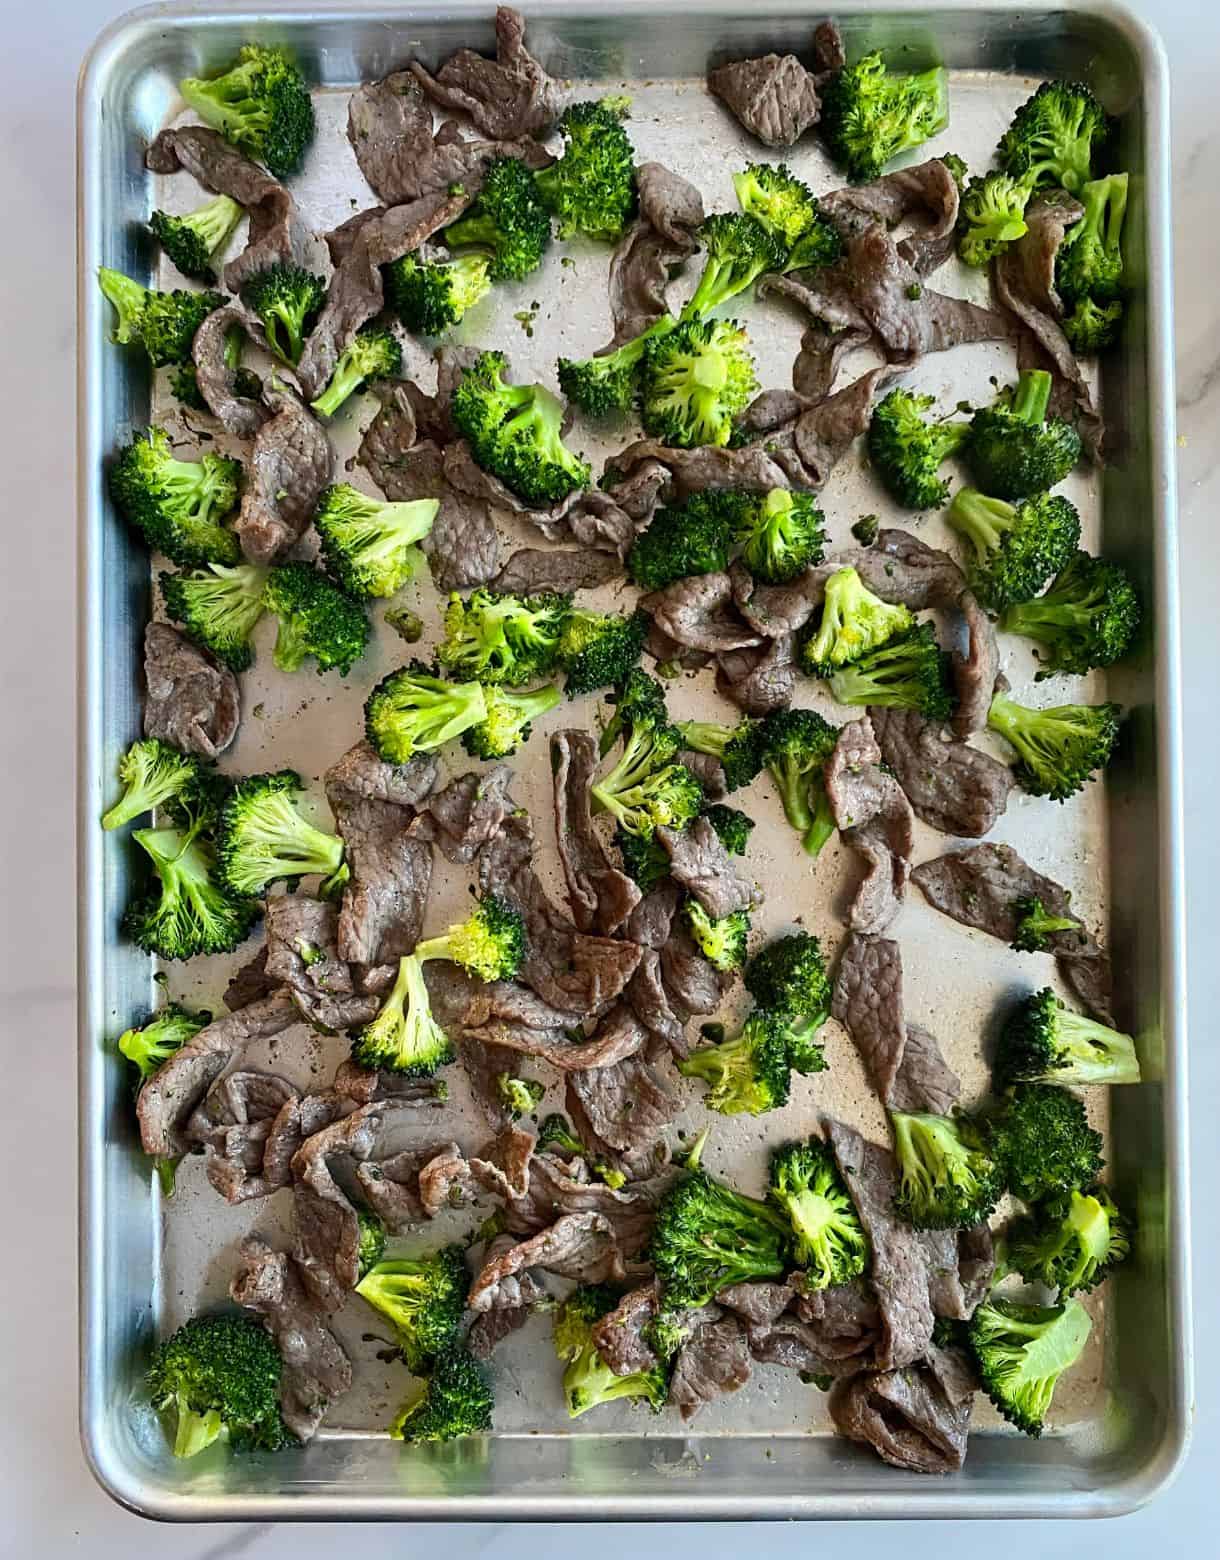 Cooked beef and broccoli on a sheet pan.